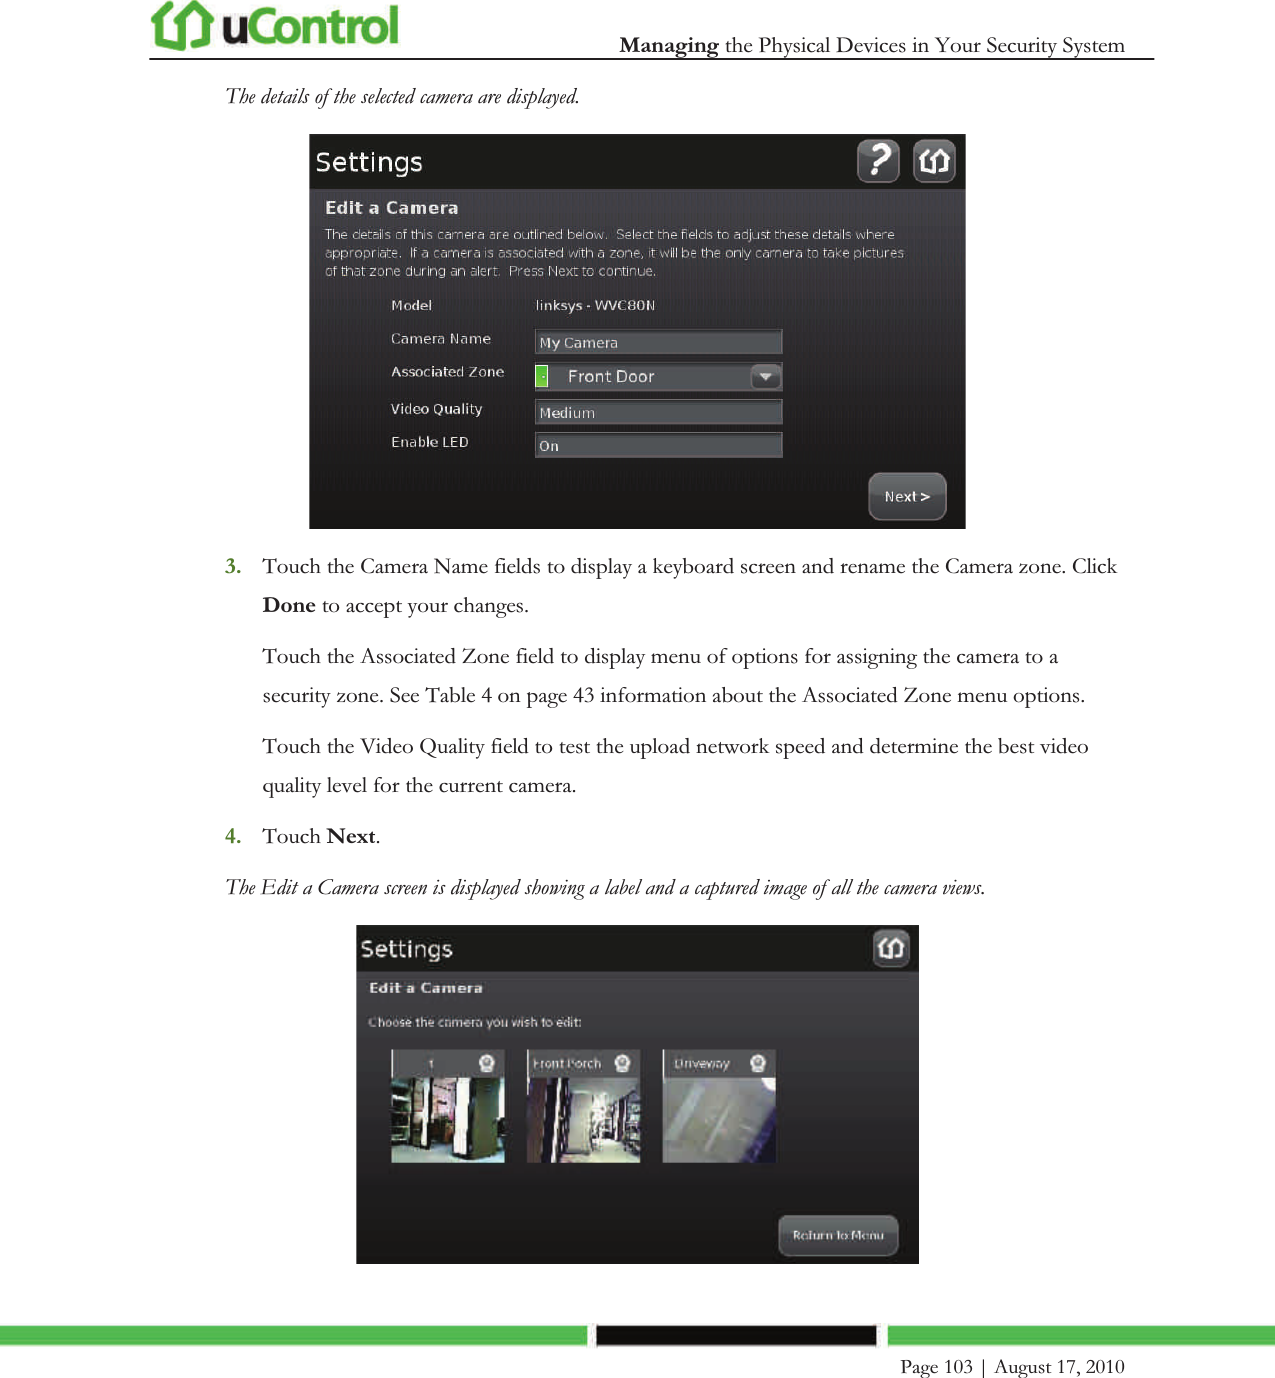  Managing the Physical Devices in Your Security System    Page 103 | August 17, 2010   The details of the selected camera are displayed.   3. Touch the Camera Name fields to display a keyboard screen and rename the Camera zone. Click Done to accept your changes. Touch the Associated Zone field to display menu of options for assigning the camera to a security zone. See Table 4 on page 43 information about the Associated Zone menu options. Touch the Video Quality field to test the upload network speed and determine the best video quality level for the current camera. 4. Touch Next. The Edit a Camera screen is displayed showing a label and a captured image of all the camera views.  